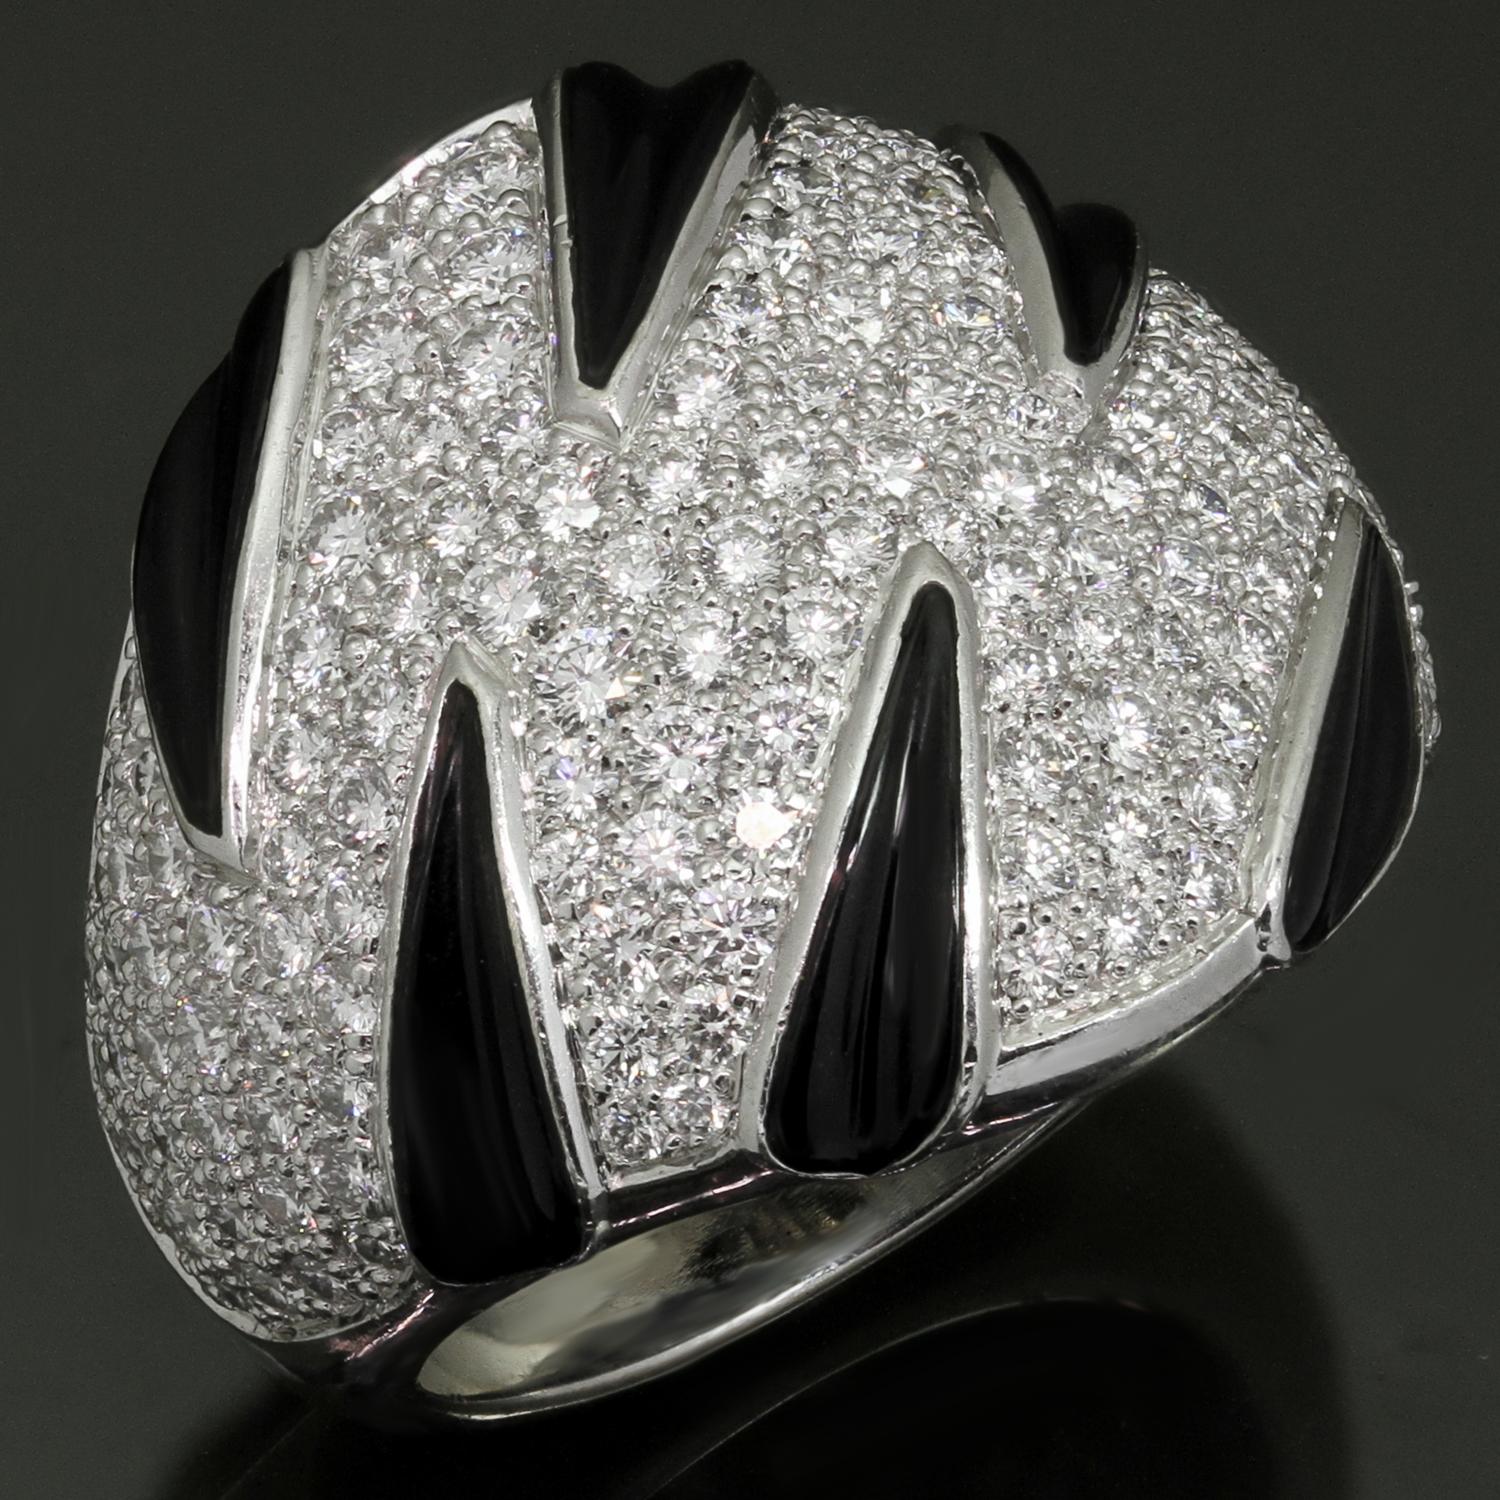 This fabulous Cartier dome ring from the chic Panthere Claws collection is crafted in 18k white gold, accented with black onyx, and pave-set with round brilliant D-E-F VVS1-VVS2 diamonds. Made in France circa 2000s. Measurements: 0.90